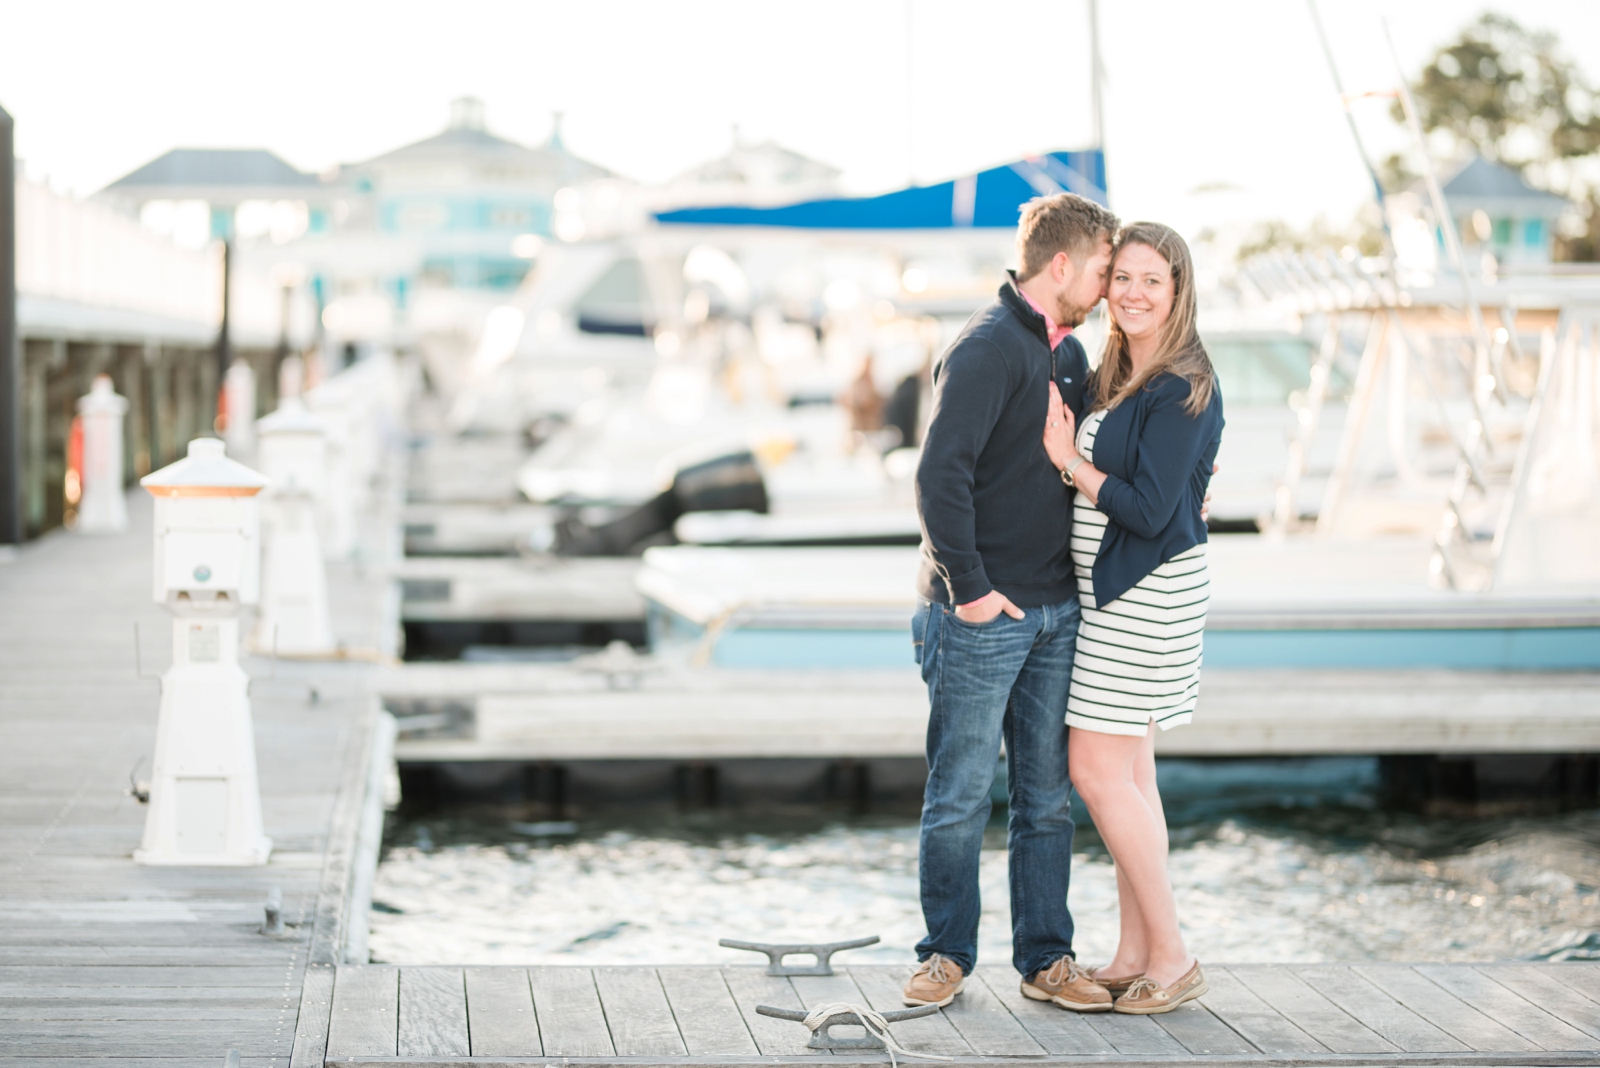 eastern-shore-cape-charles-waterfront-engagement-session-photo_7236.jpg